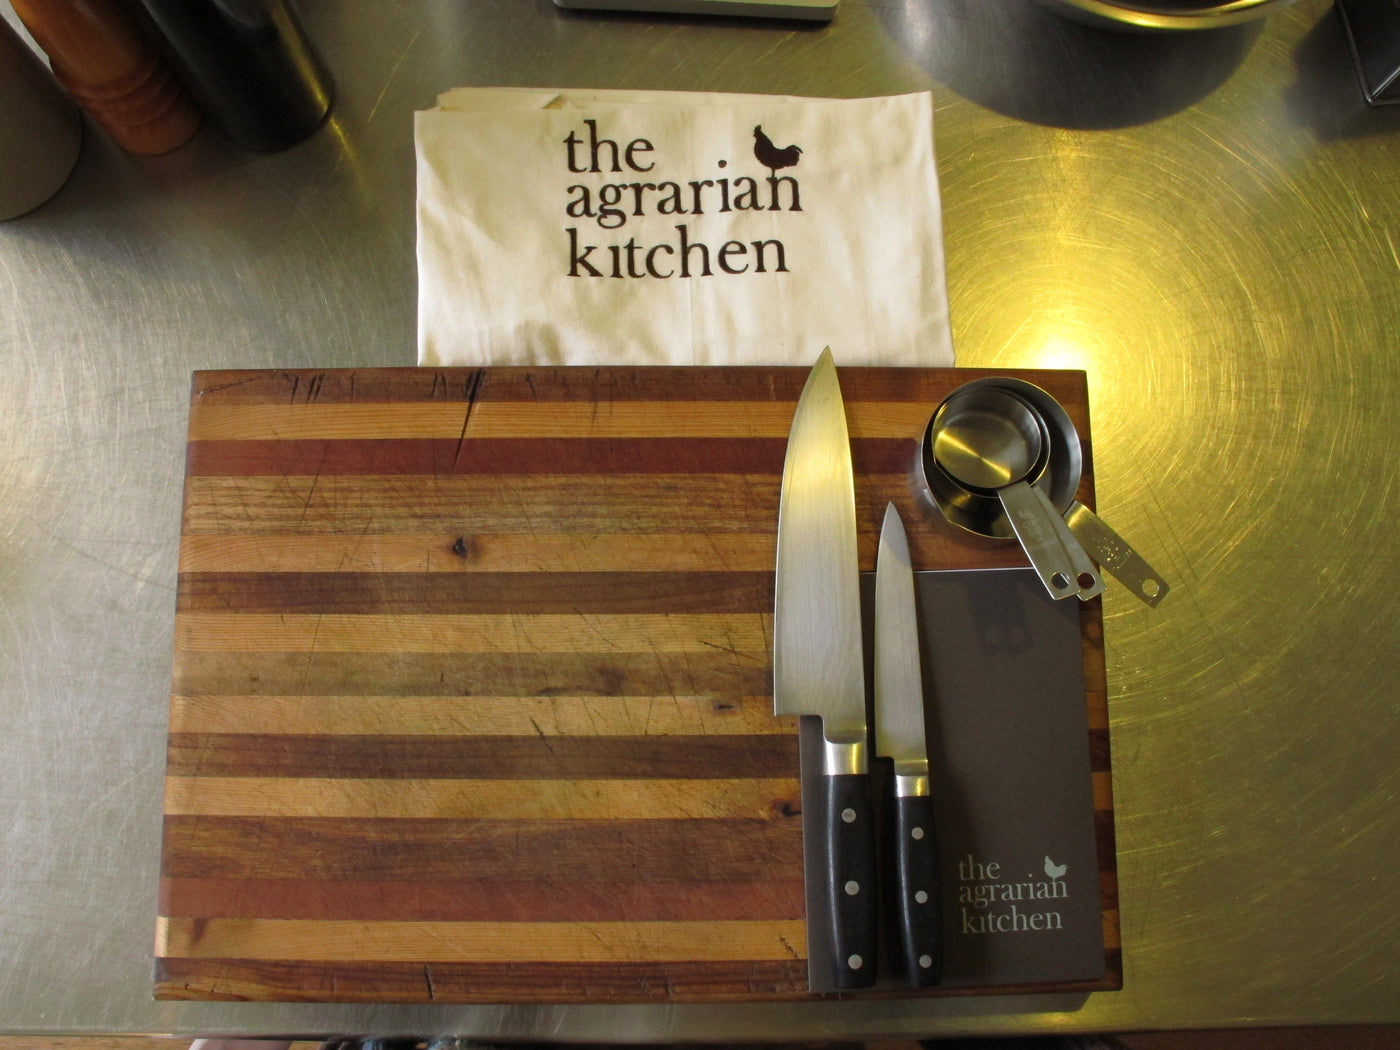 The Agrarian Kitchen - a major highlight from Tassie